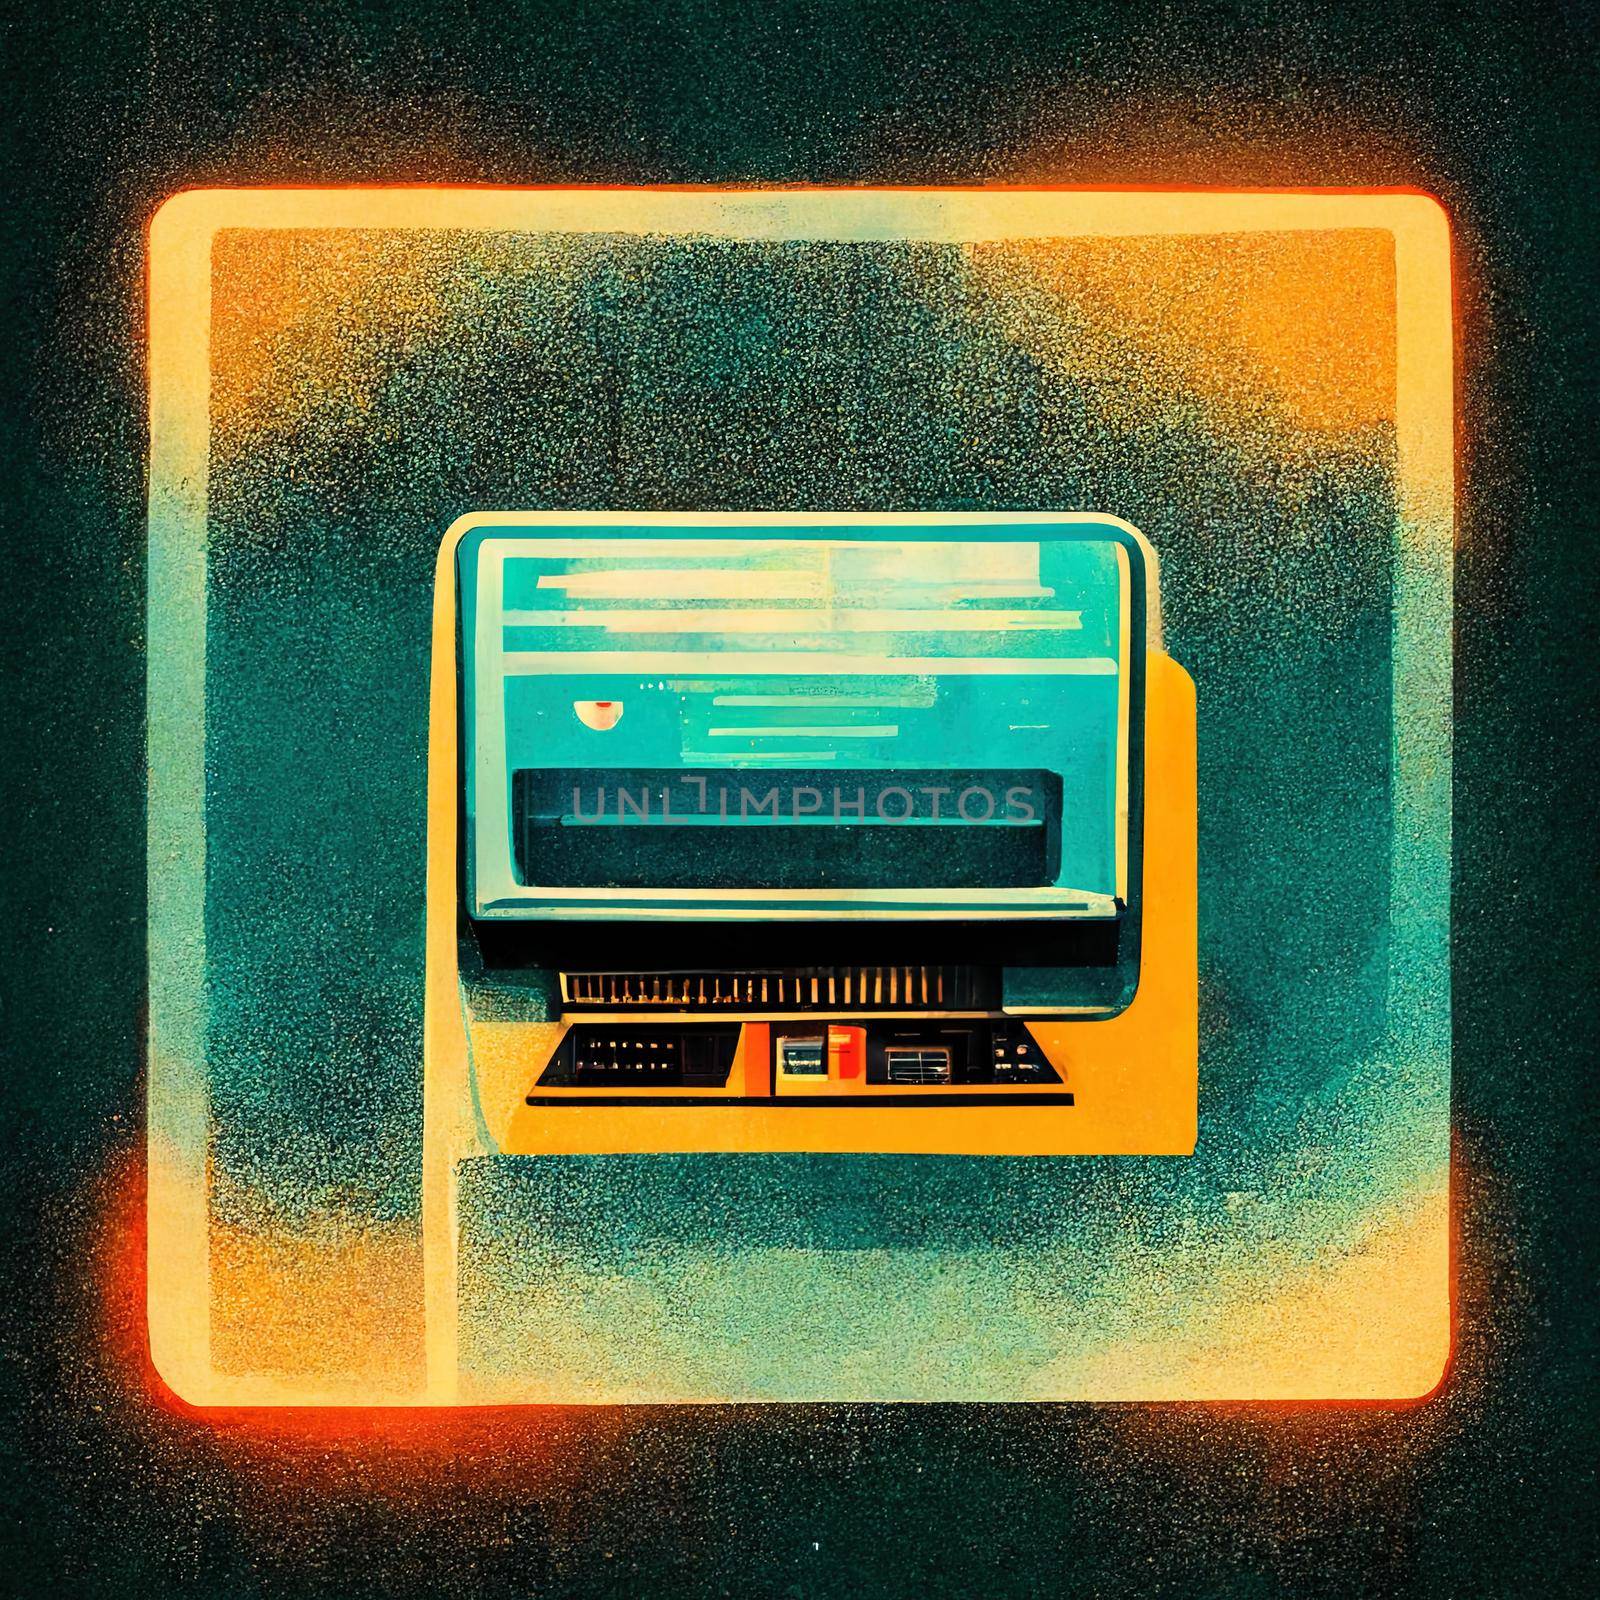 Old grungy style network computer icon. High quality 3d illustration